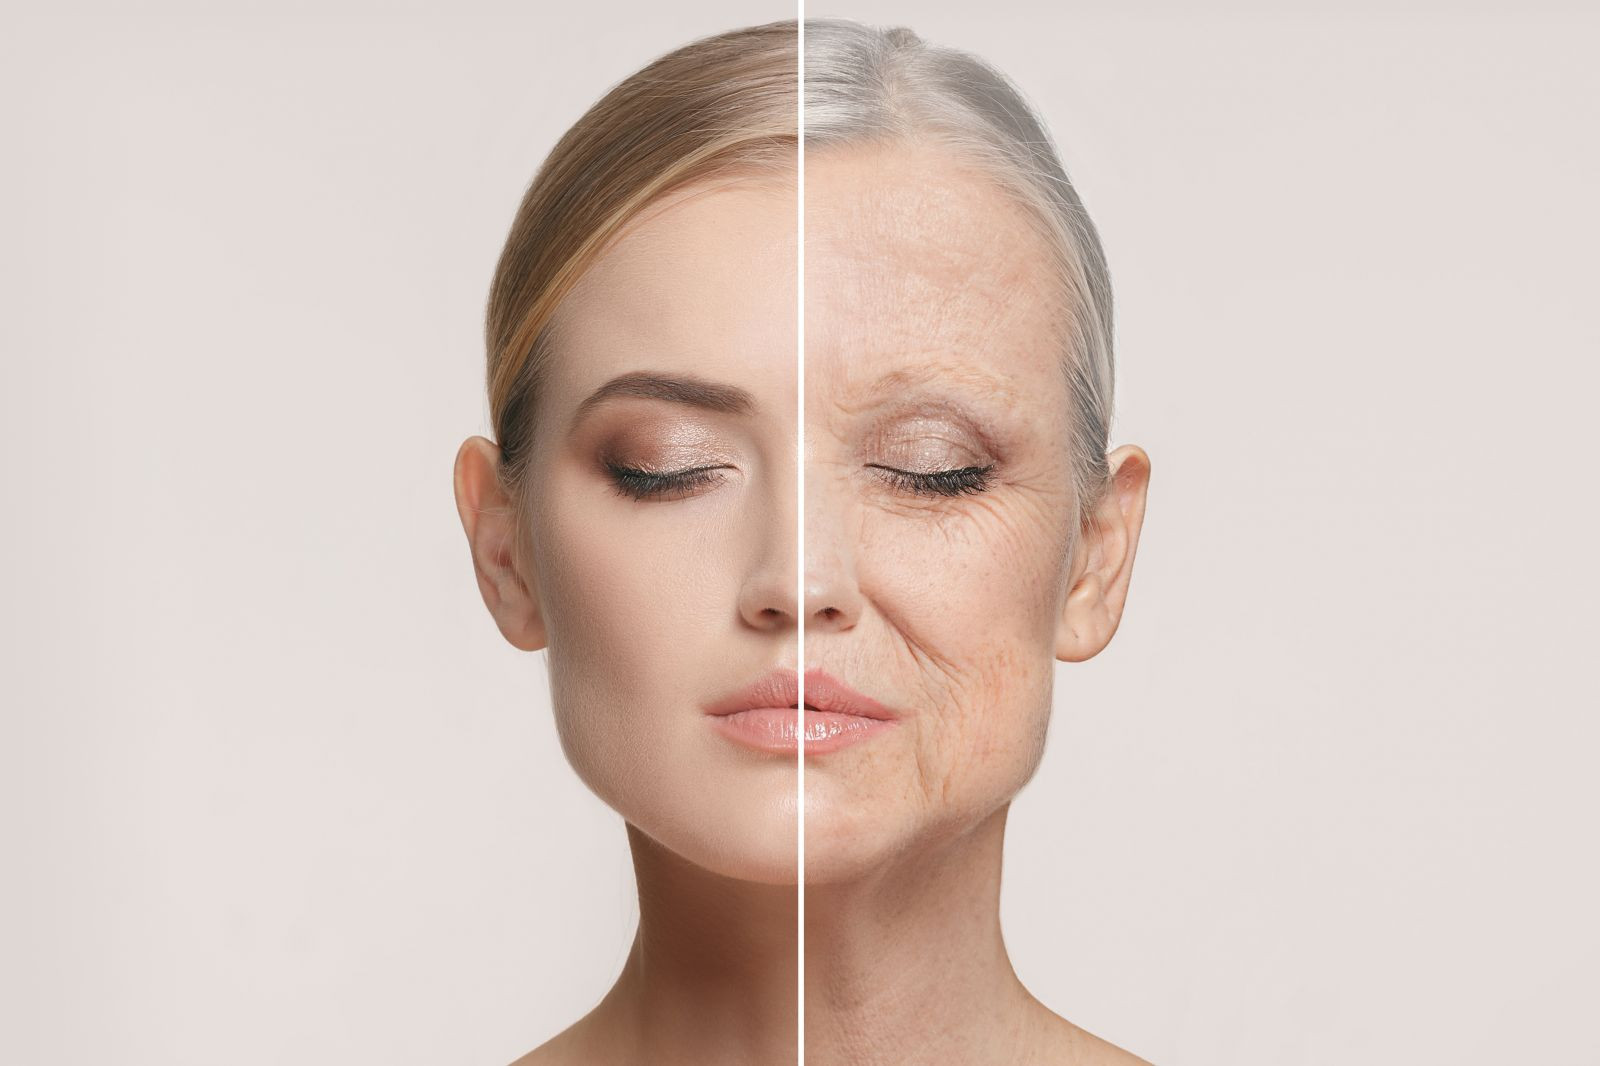 5 Simple Lifestyle Changes for Fighting the Signs of Aging